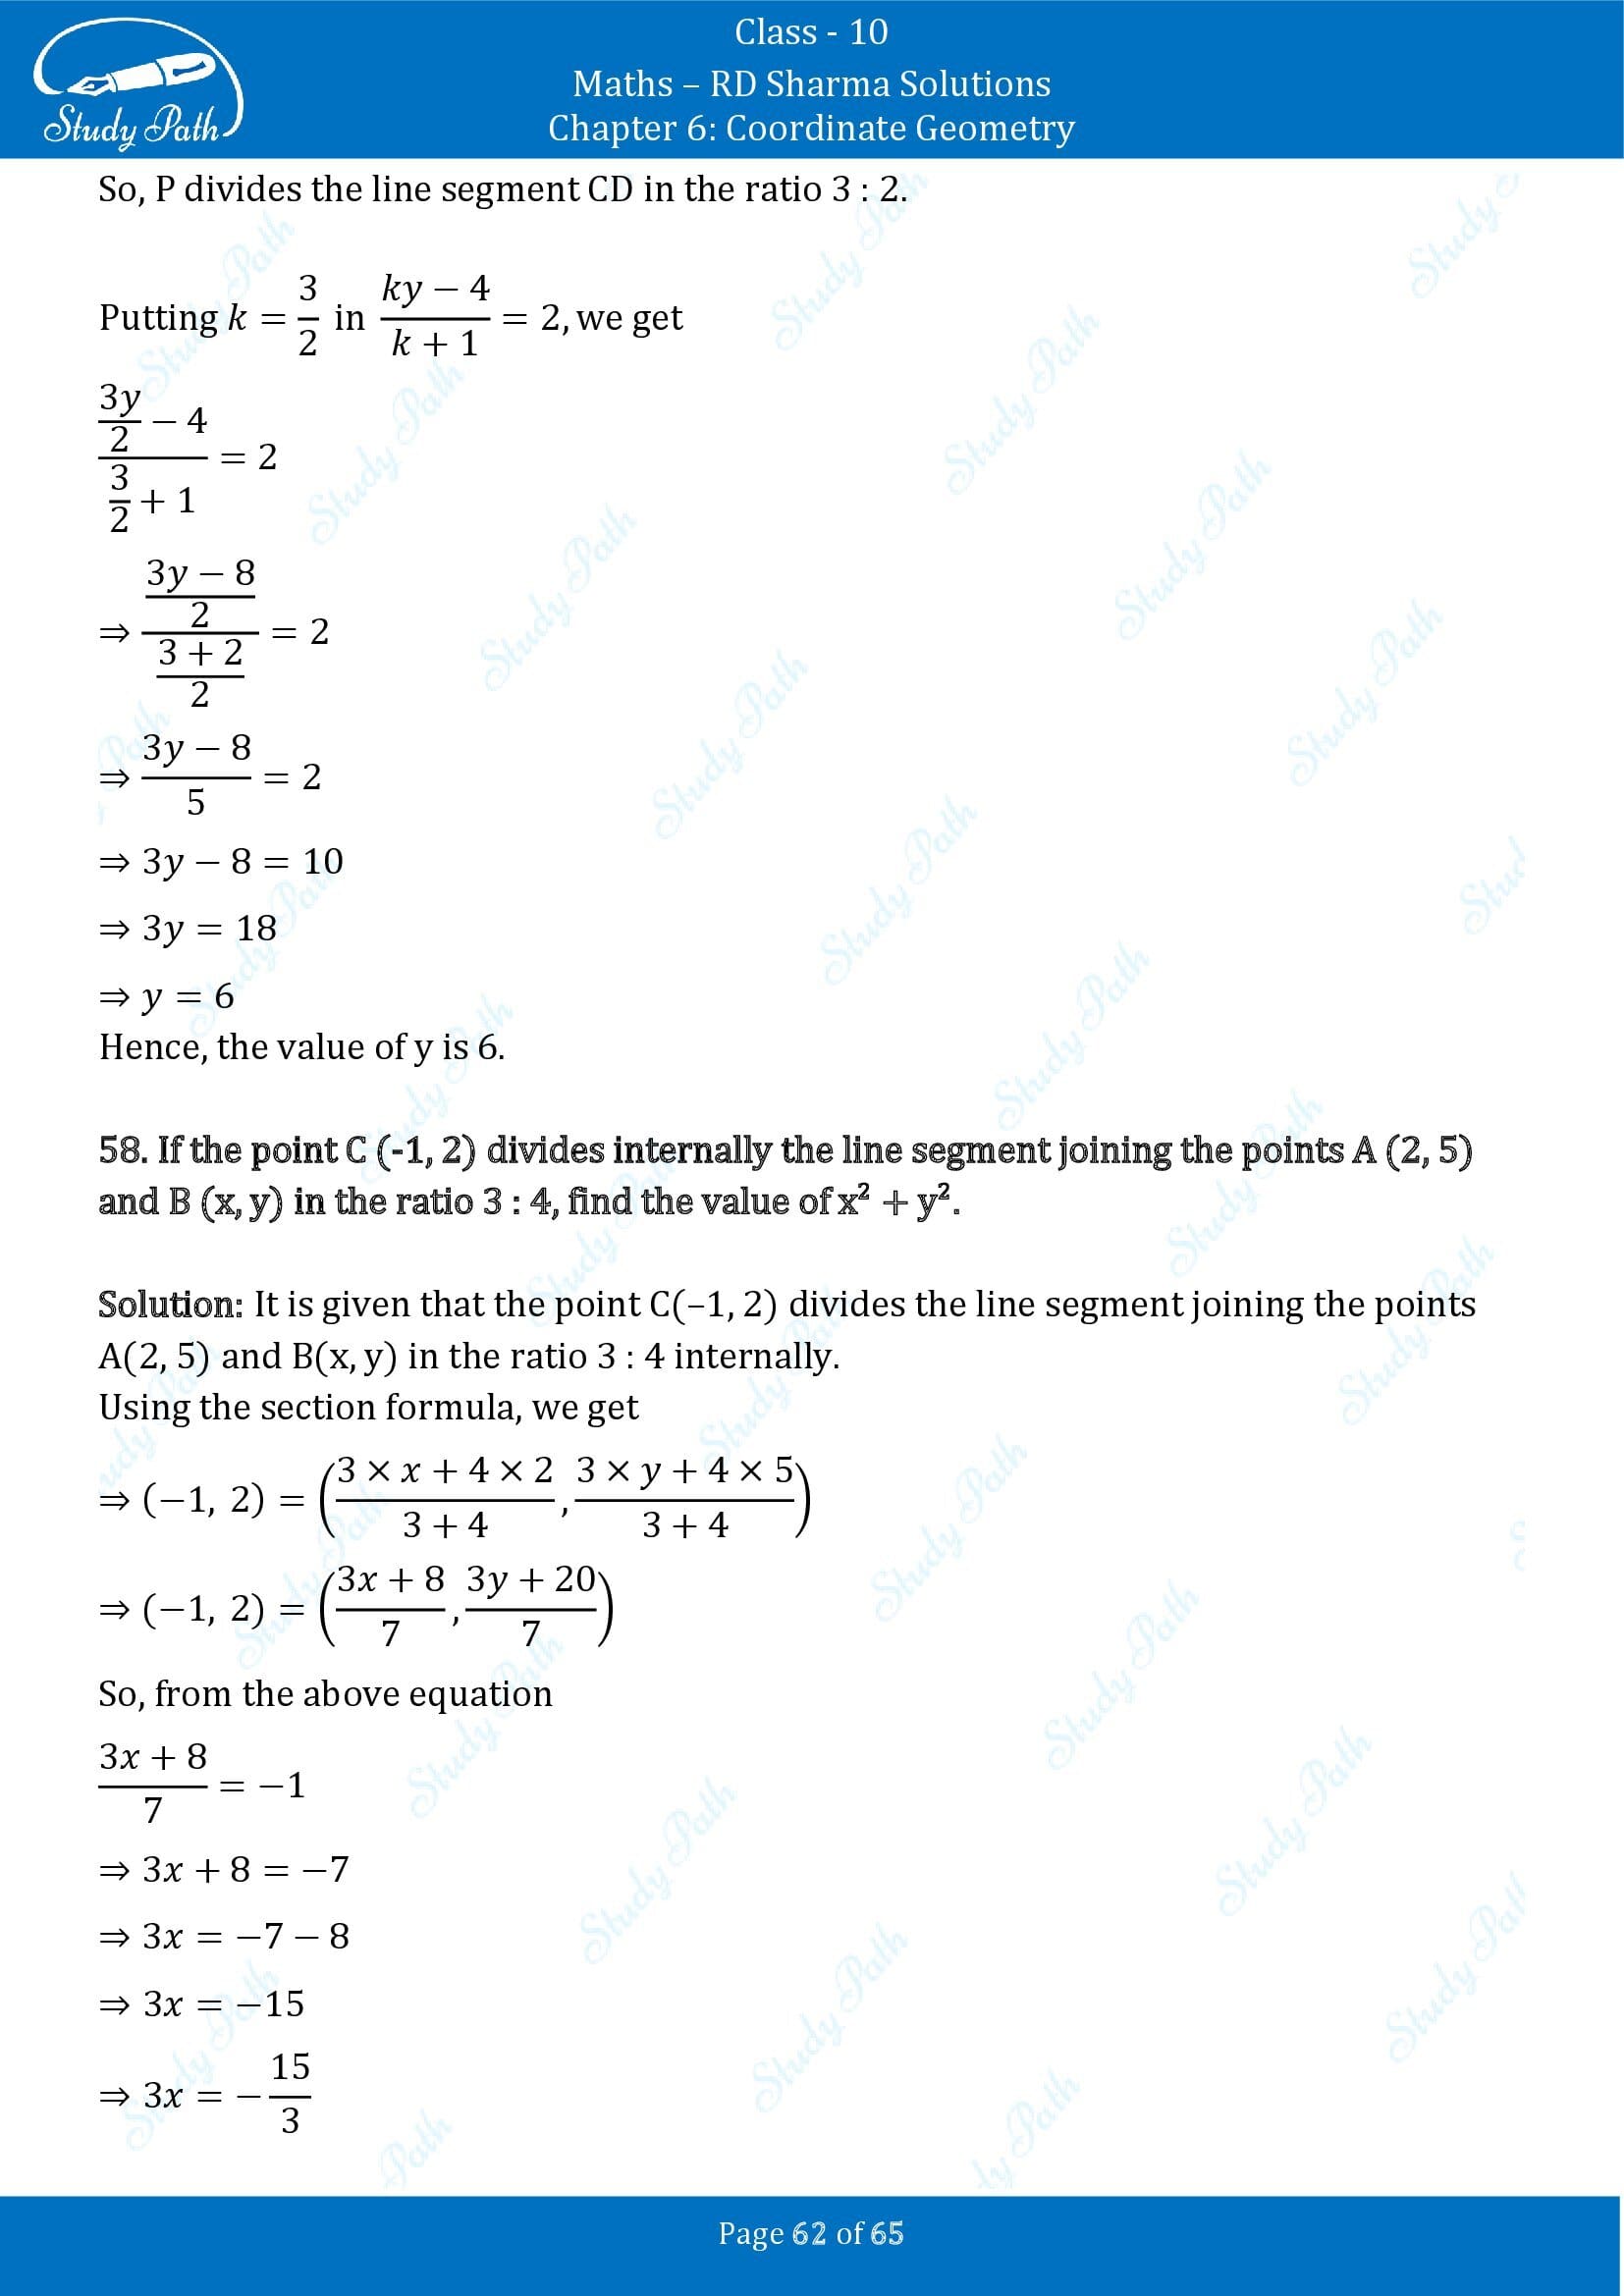 RD Sharma Solutions Class 10 Chapter 6 Coordinate Geometry Exercise 6.3 00062